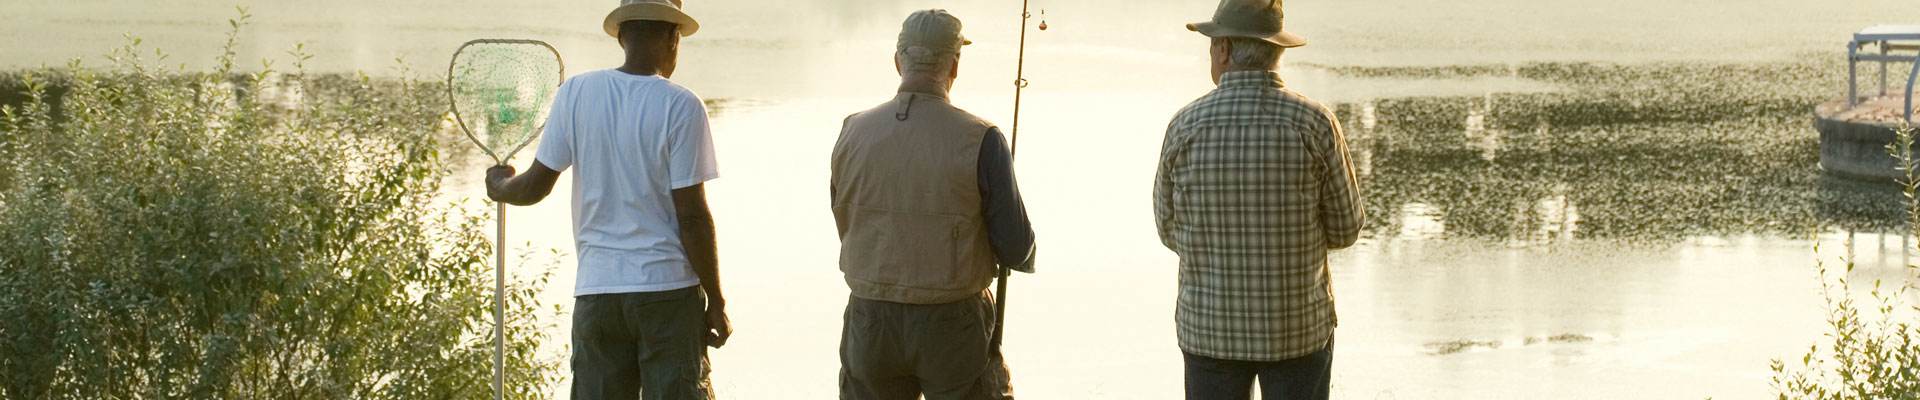 Men fishing and talking about erectile dysfunction